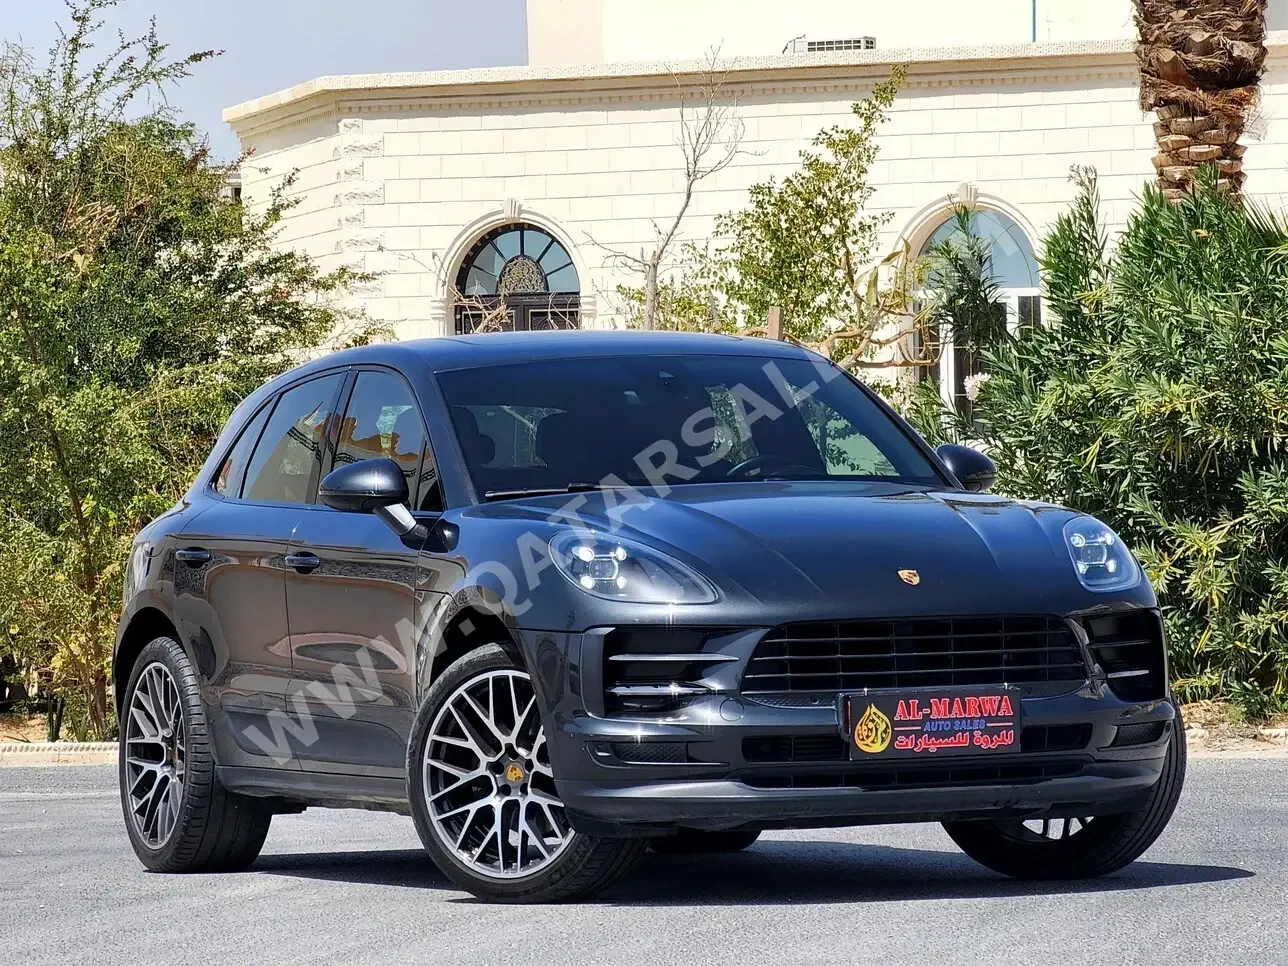 Porsche  Macan  2019  Automatic  62,000 Km  4 Cylinder  Four Wheel Drive (4WD)  SUV  Gray